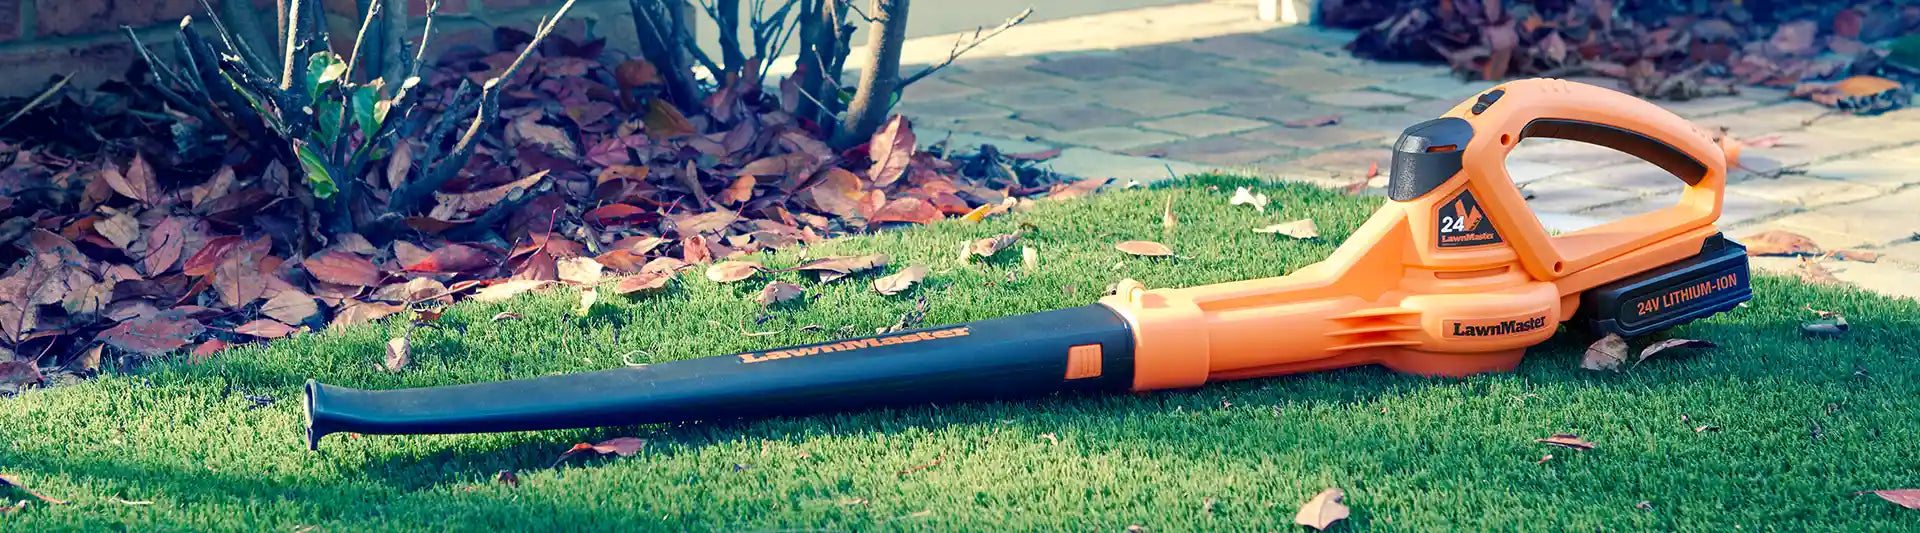 LawnMaster Cordless Leaf Blowers